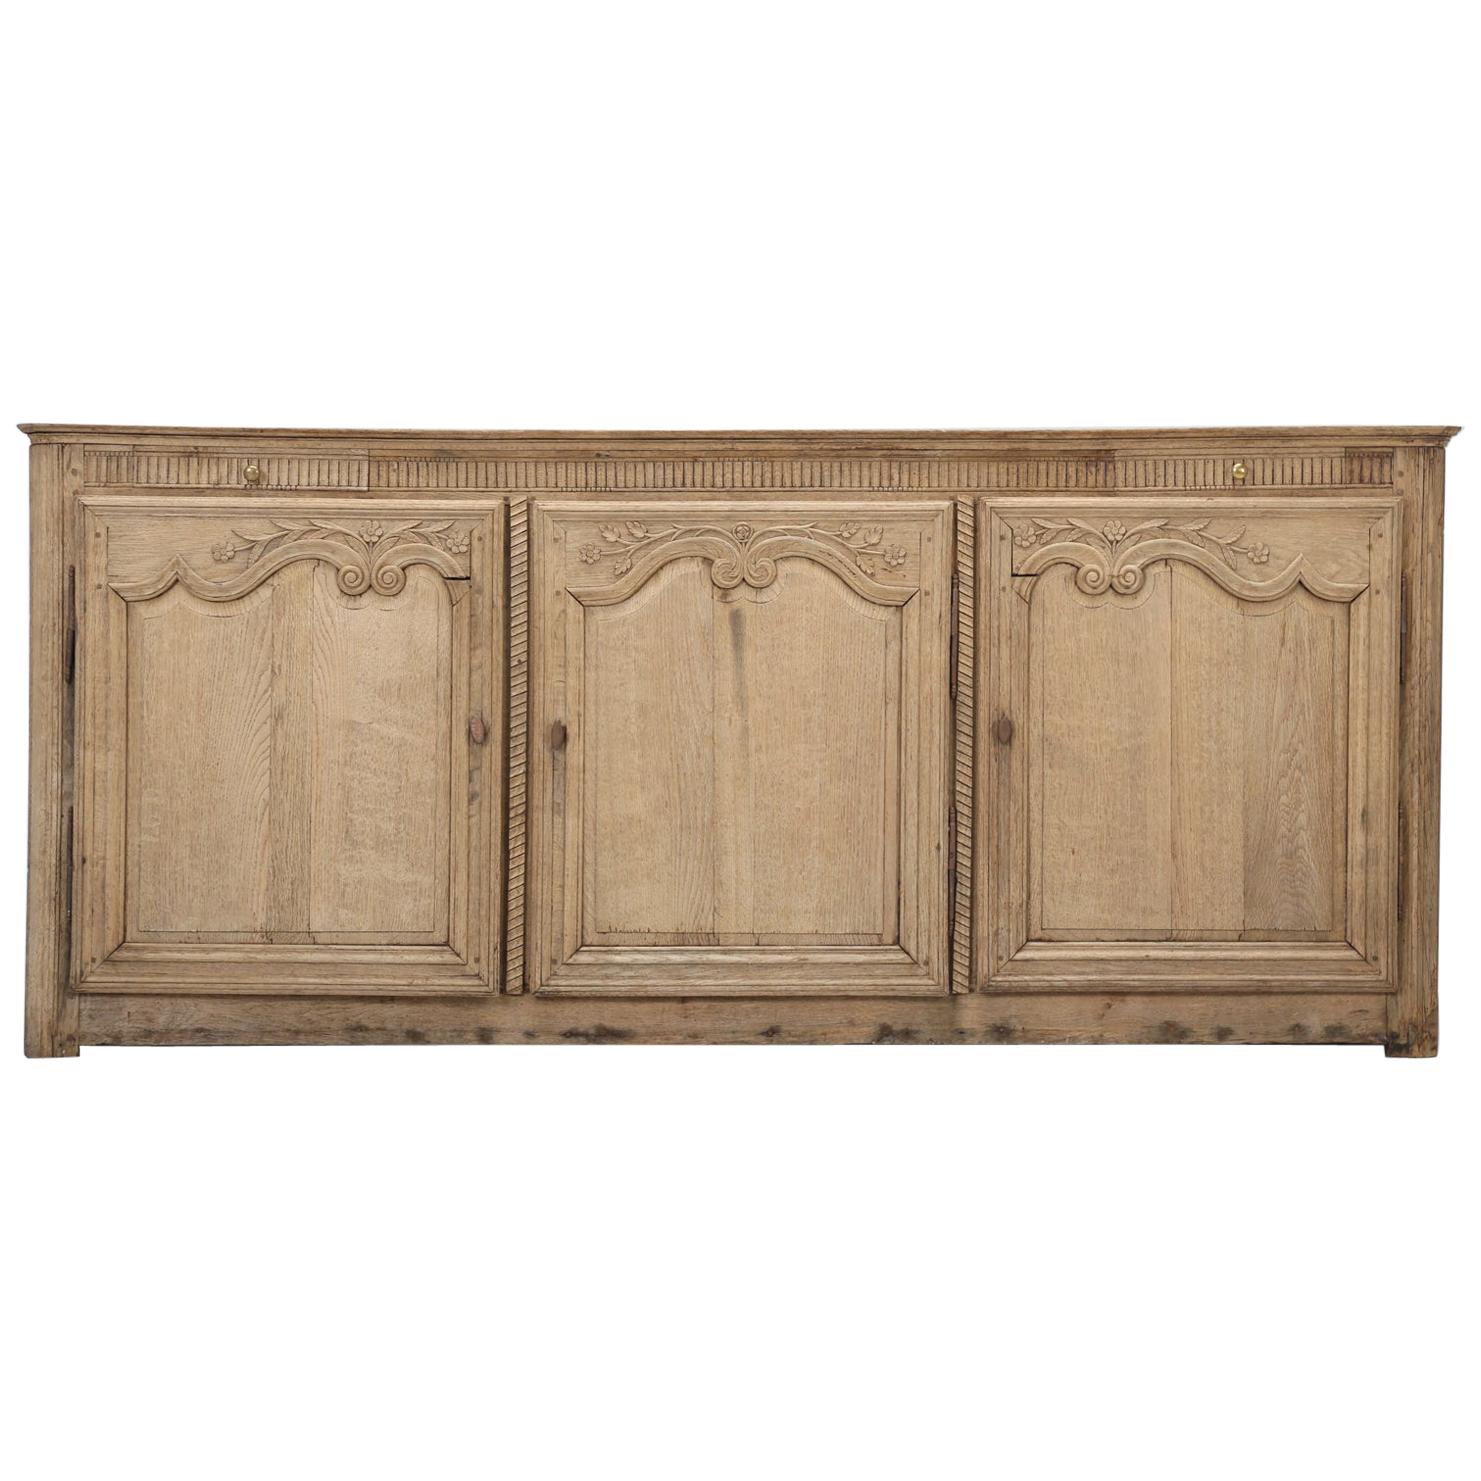 Antique French White Oak Buffet from the Early 1800s